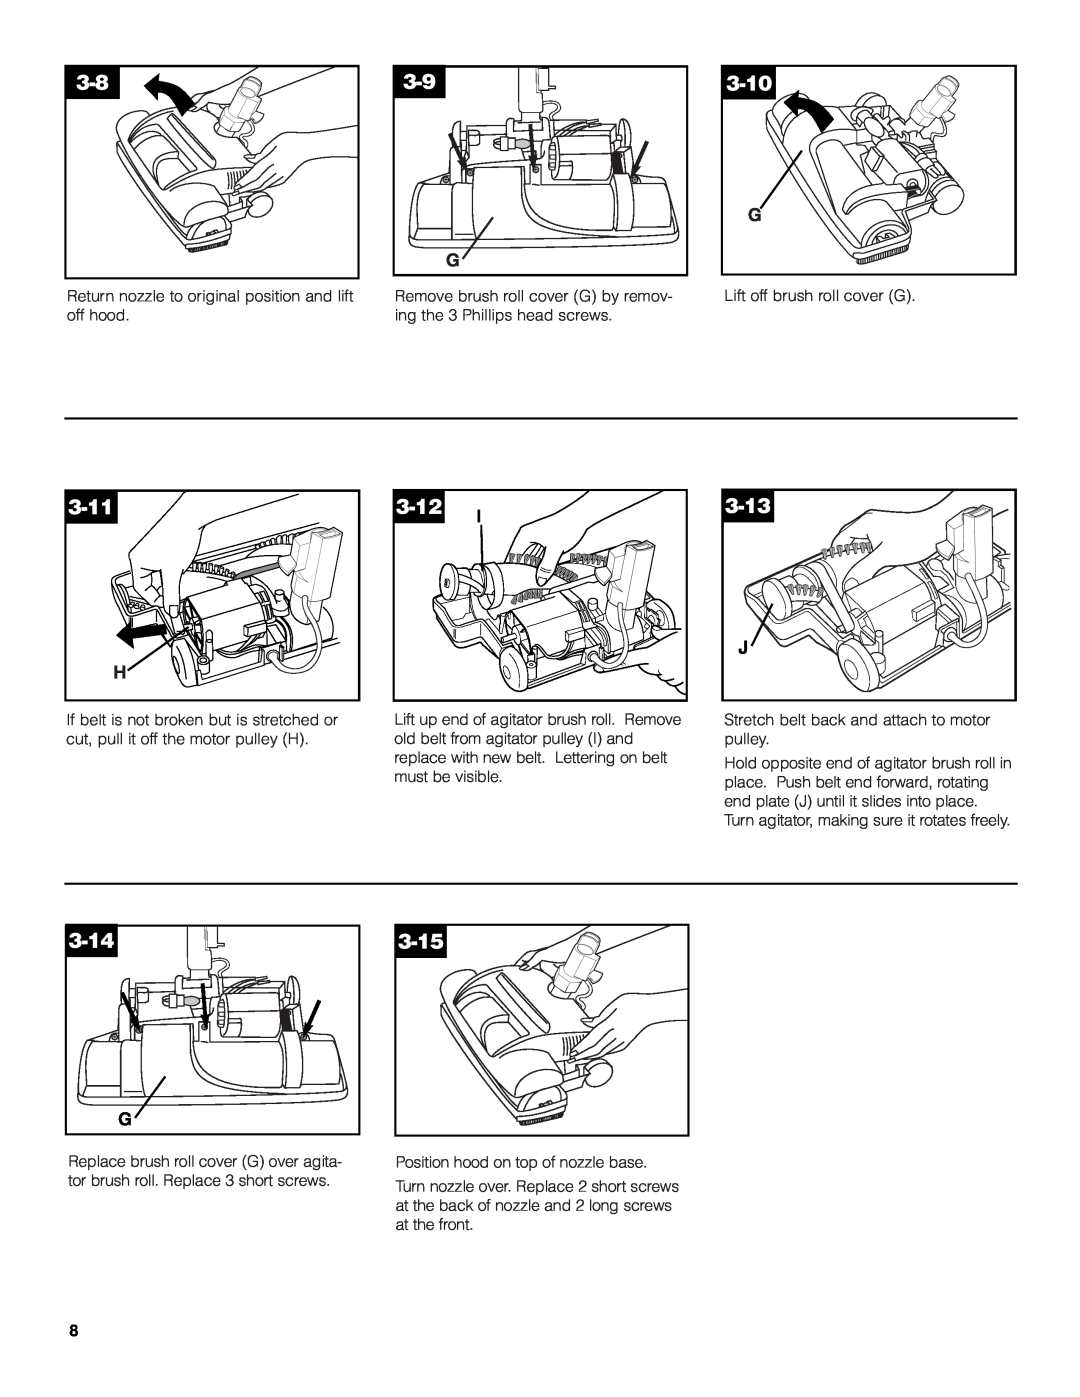 Hoover S3755050 owner manual 3-10, 3-11, 3-12, 3-13, 3-14, 3-15 